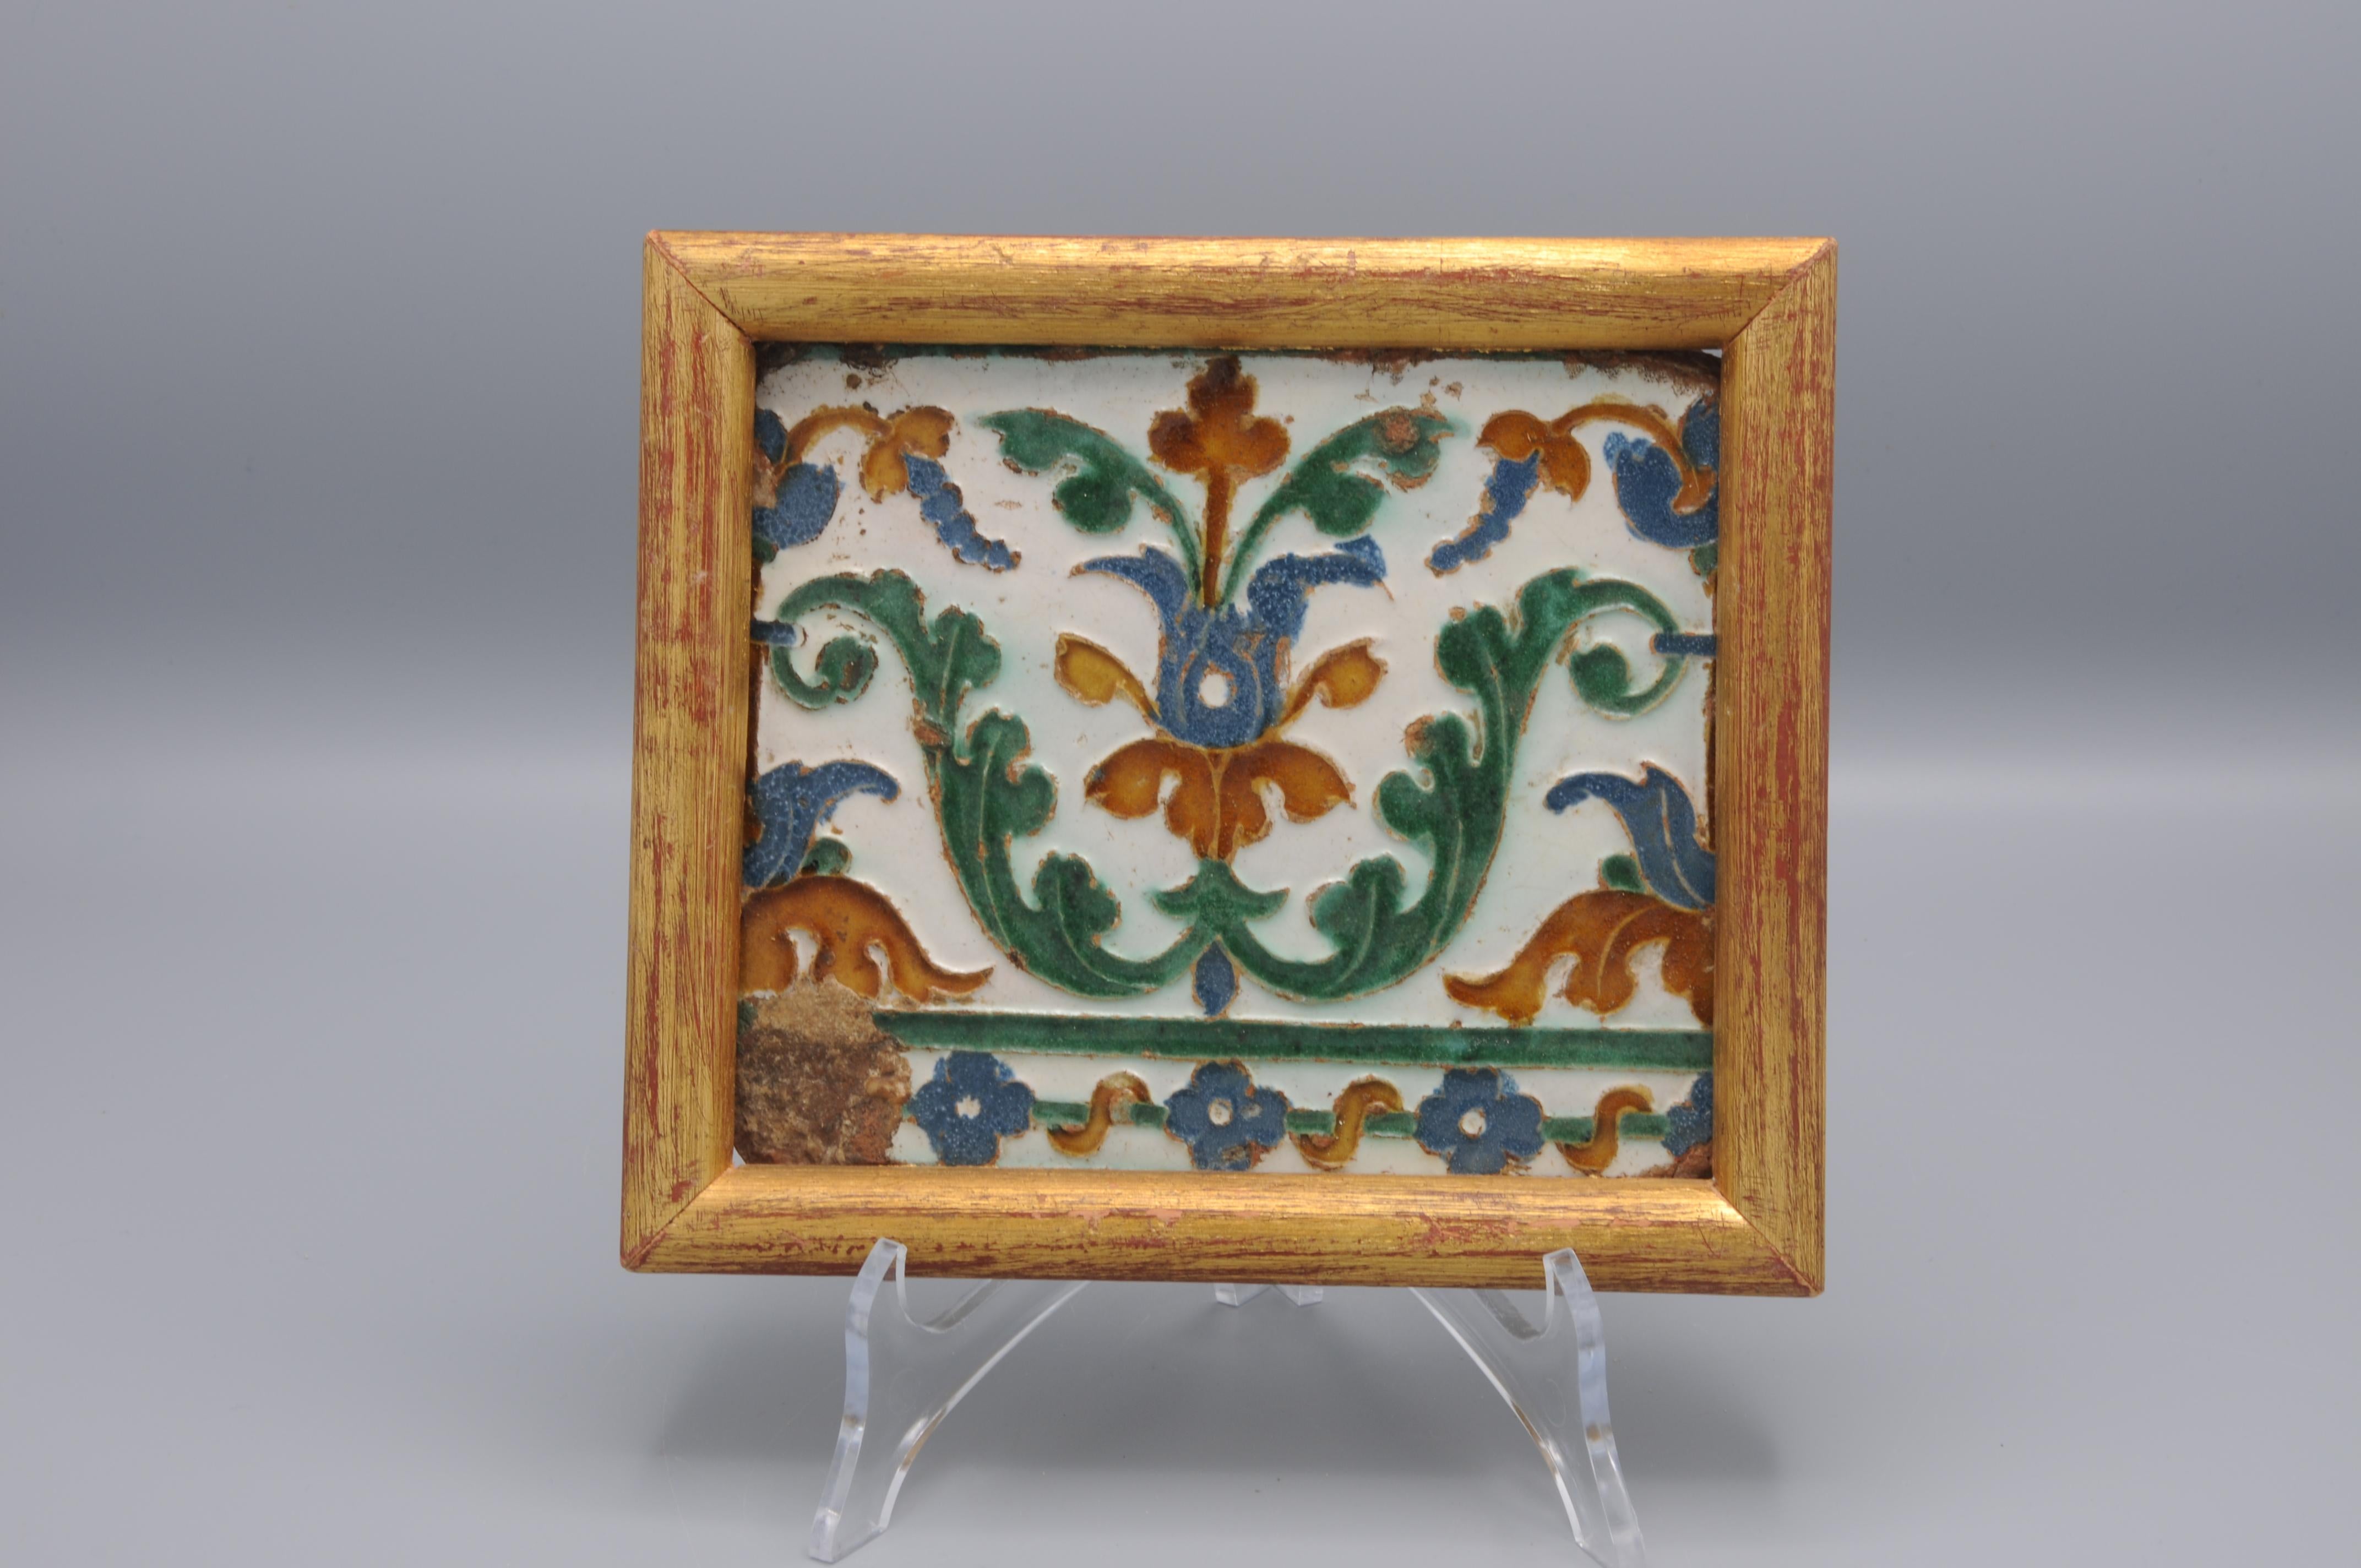 Early Arista y cuenca tile made in Toledo. Tile decorated in renaissance with stylized flowers was probably made between 1550 and 1575. 


